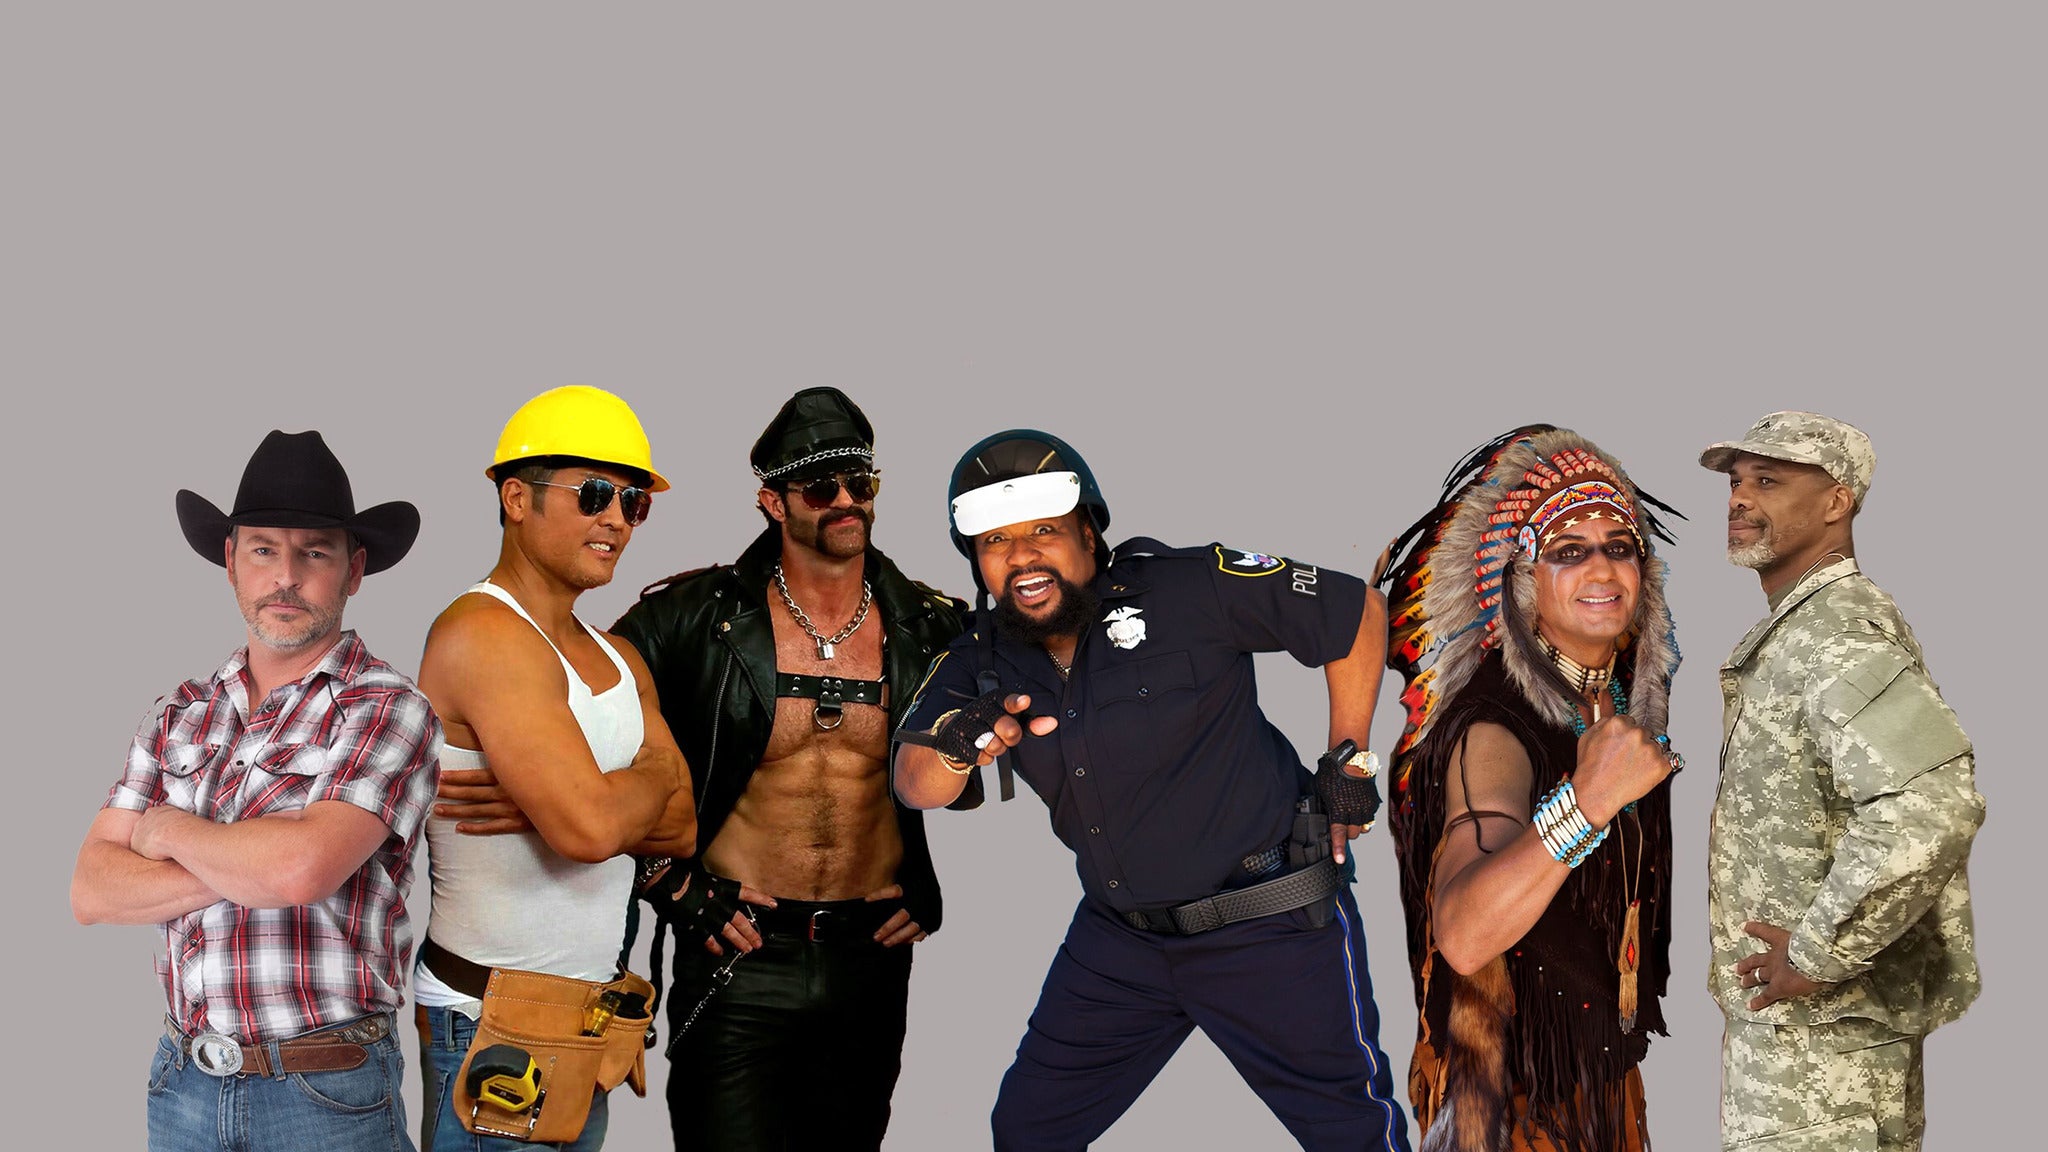 Village People presale code for show tickets in Washington, PA (Hollywood Casino at The Meadows)